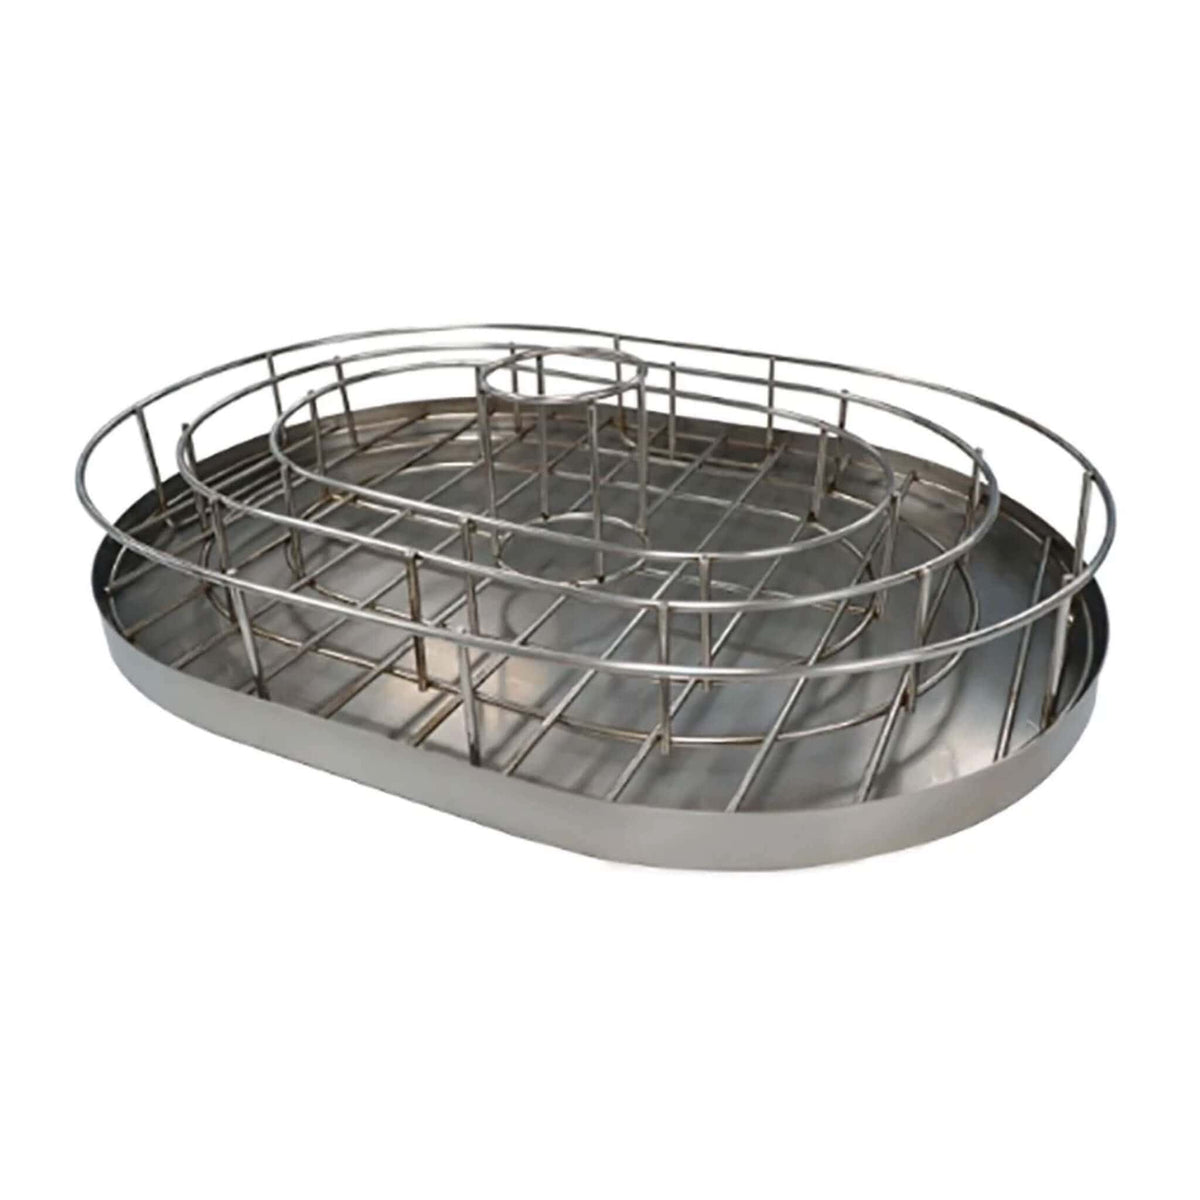 Primo Rib and Chicken Holder includes Drip Tray - Culinary Hardware